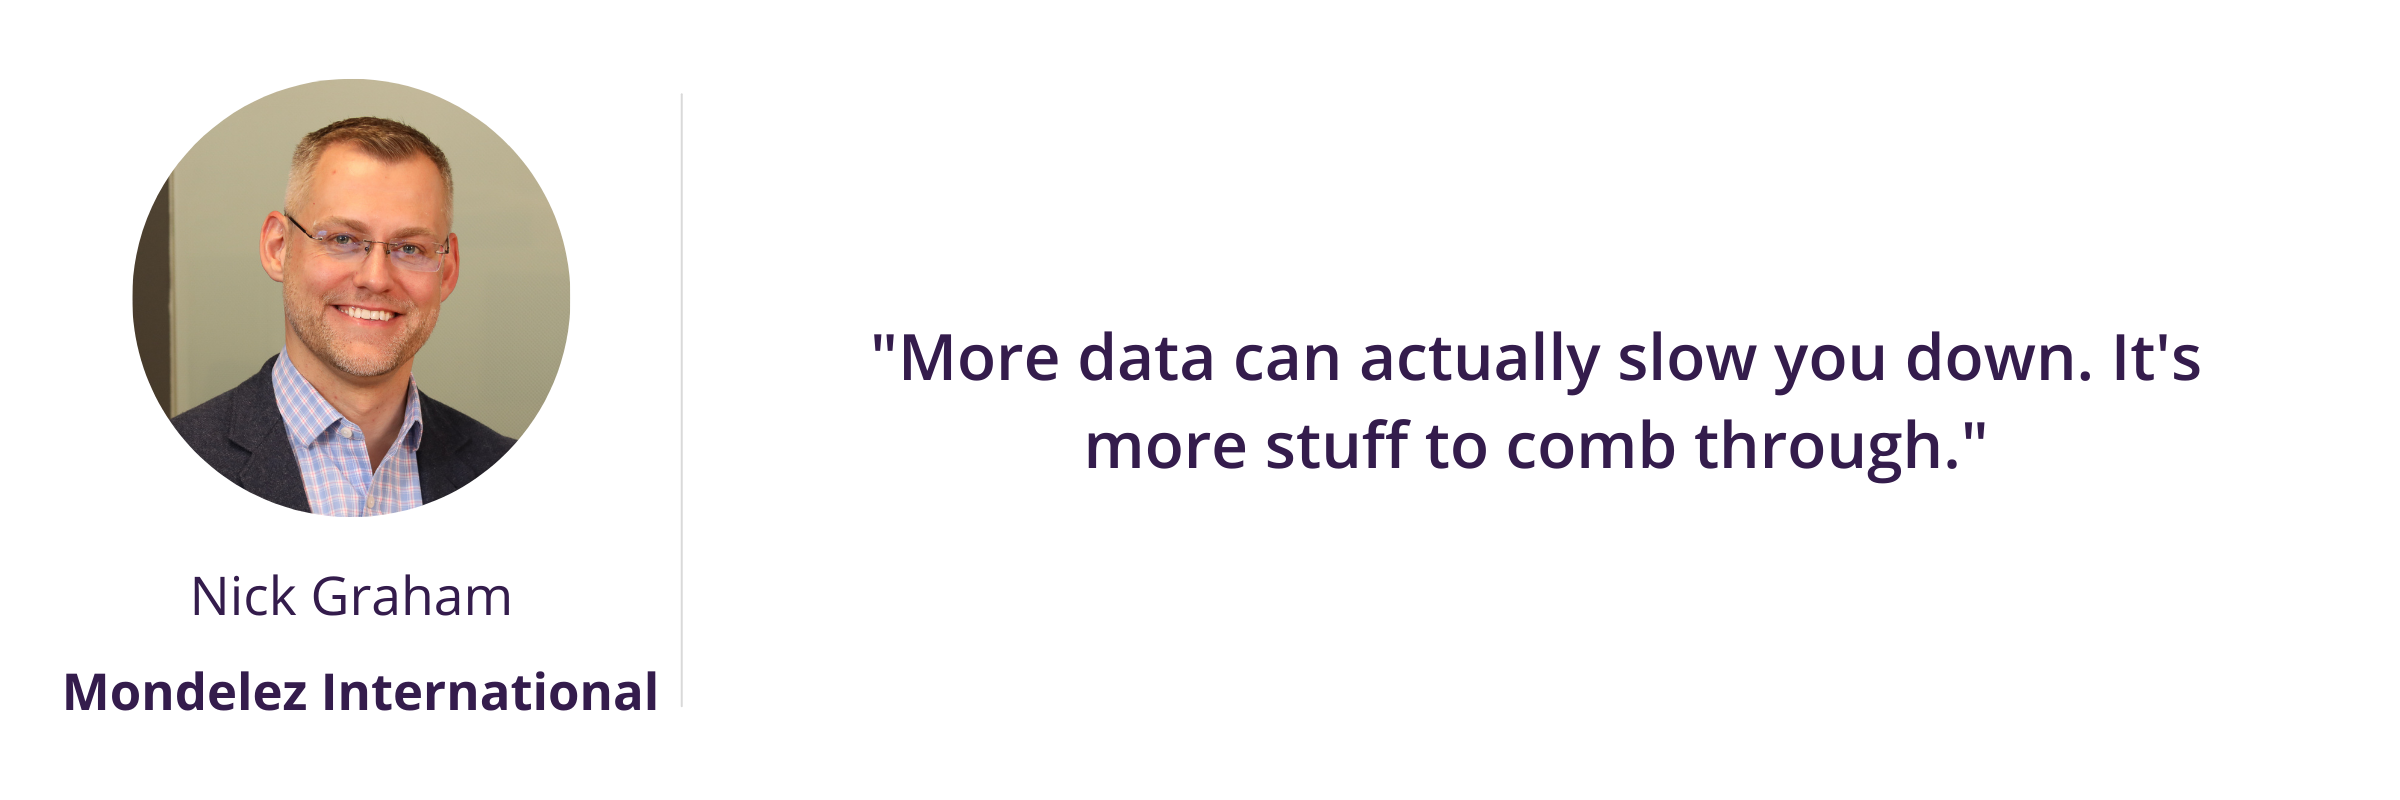 "More data can actually slow you down. It's more stuff to comb through."